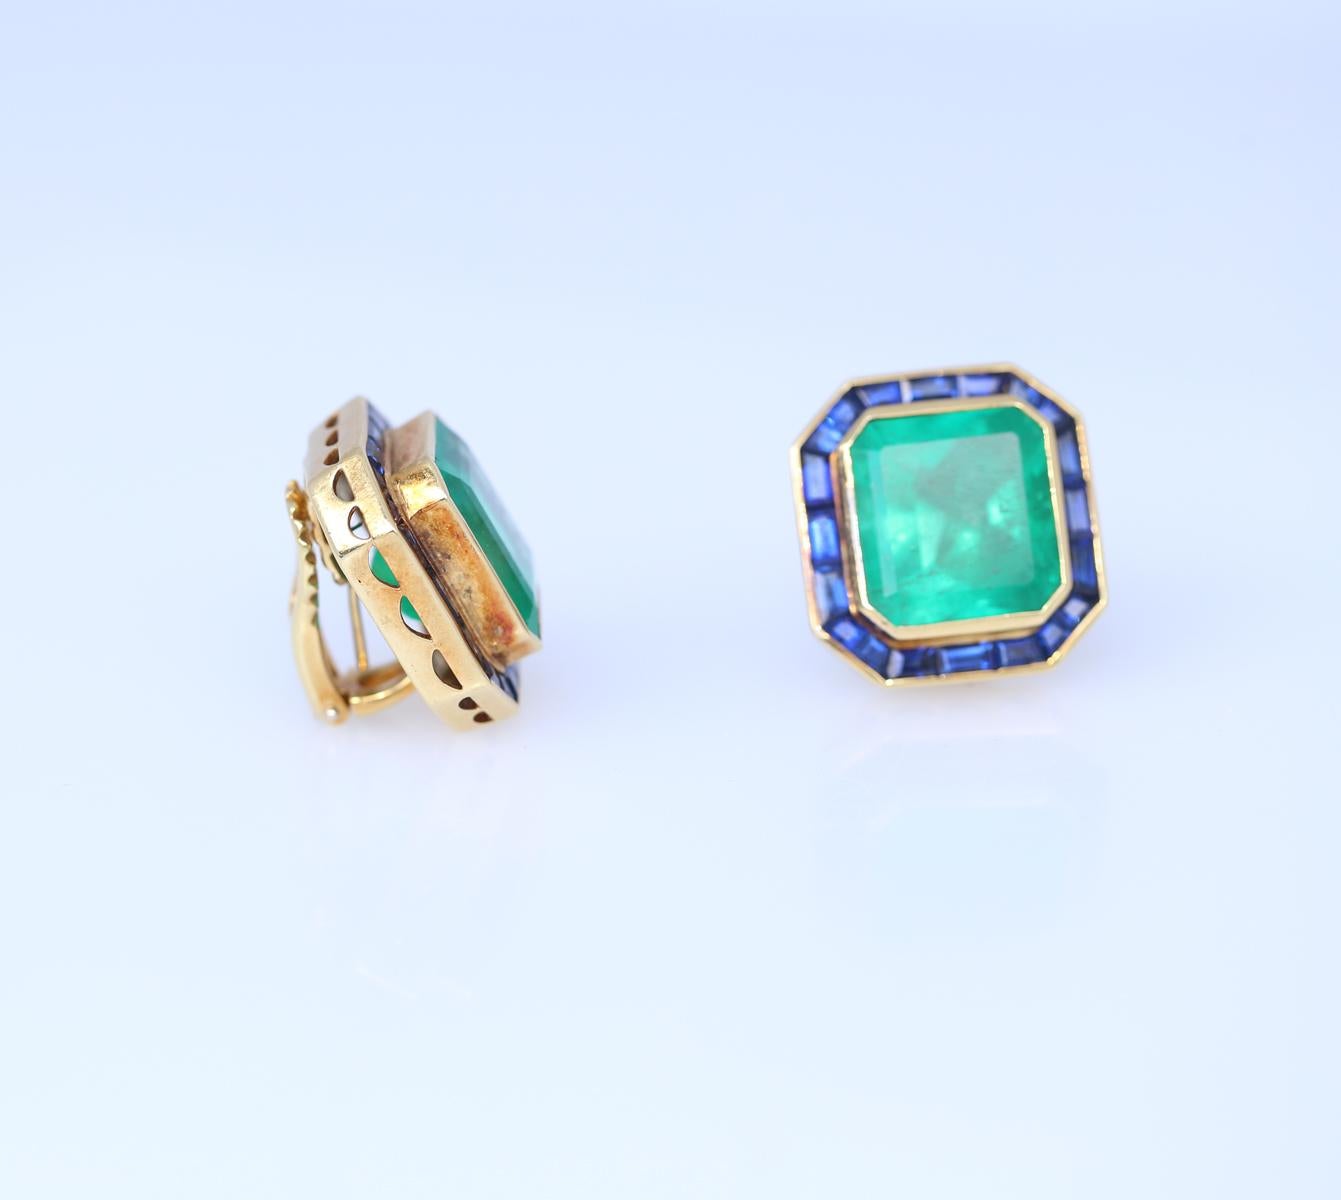 31 Carats Emerald Sapphire Earrings Yellow Gold Certified, 1975 For Sale 3